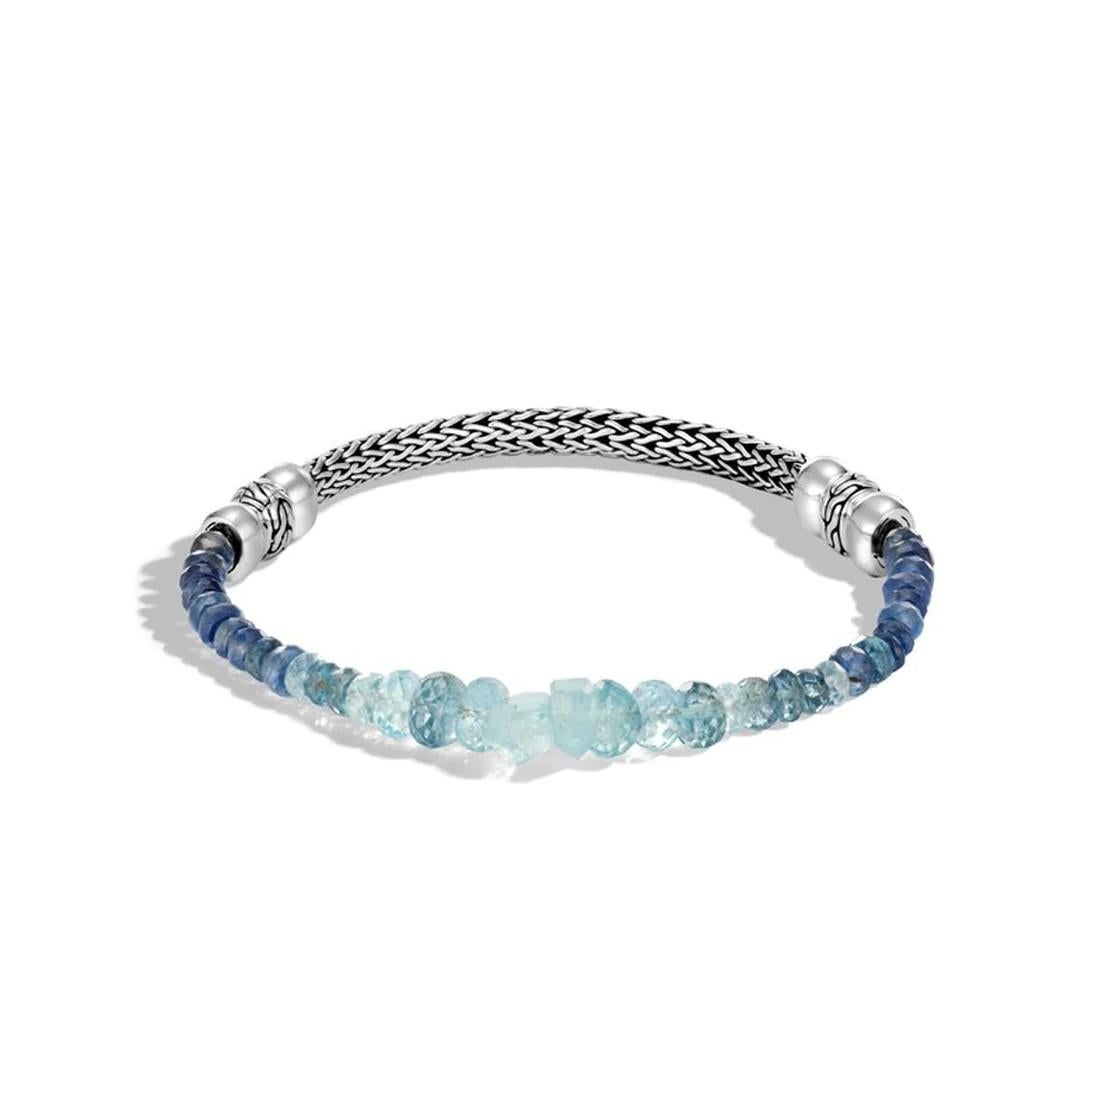 This John Hardy Classic Chain Collection bracelet features 5 mm sterling silver chain with Aquamarine and Kyanite gemstones. 

Bracelet is secured by a pusher clasp, and is size medium.

John Hardy Classic Chain Collection
Bracelet

Extra Small 5 mm